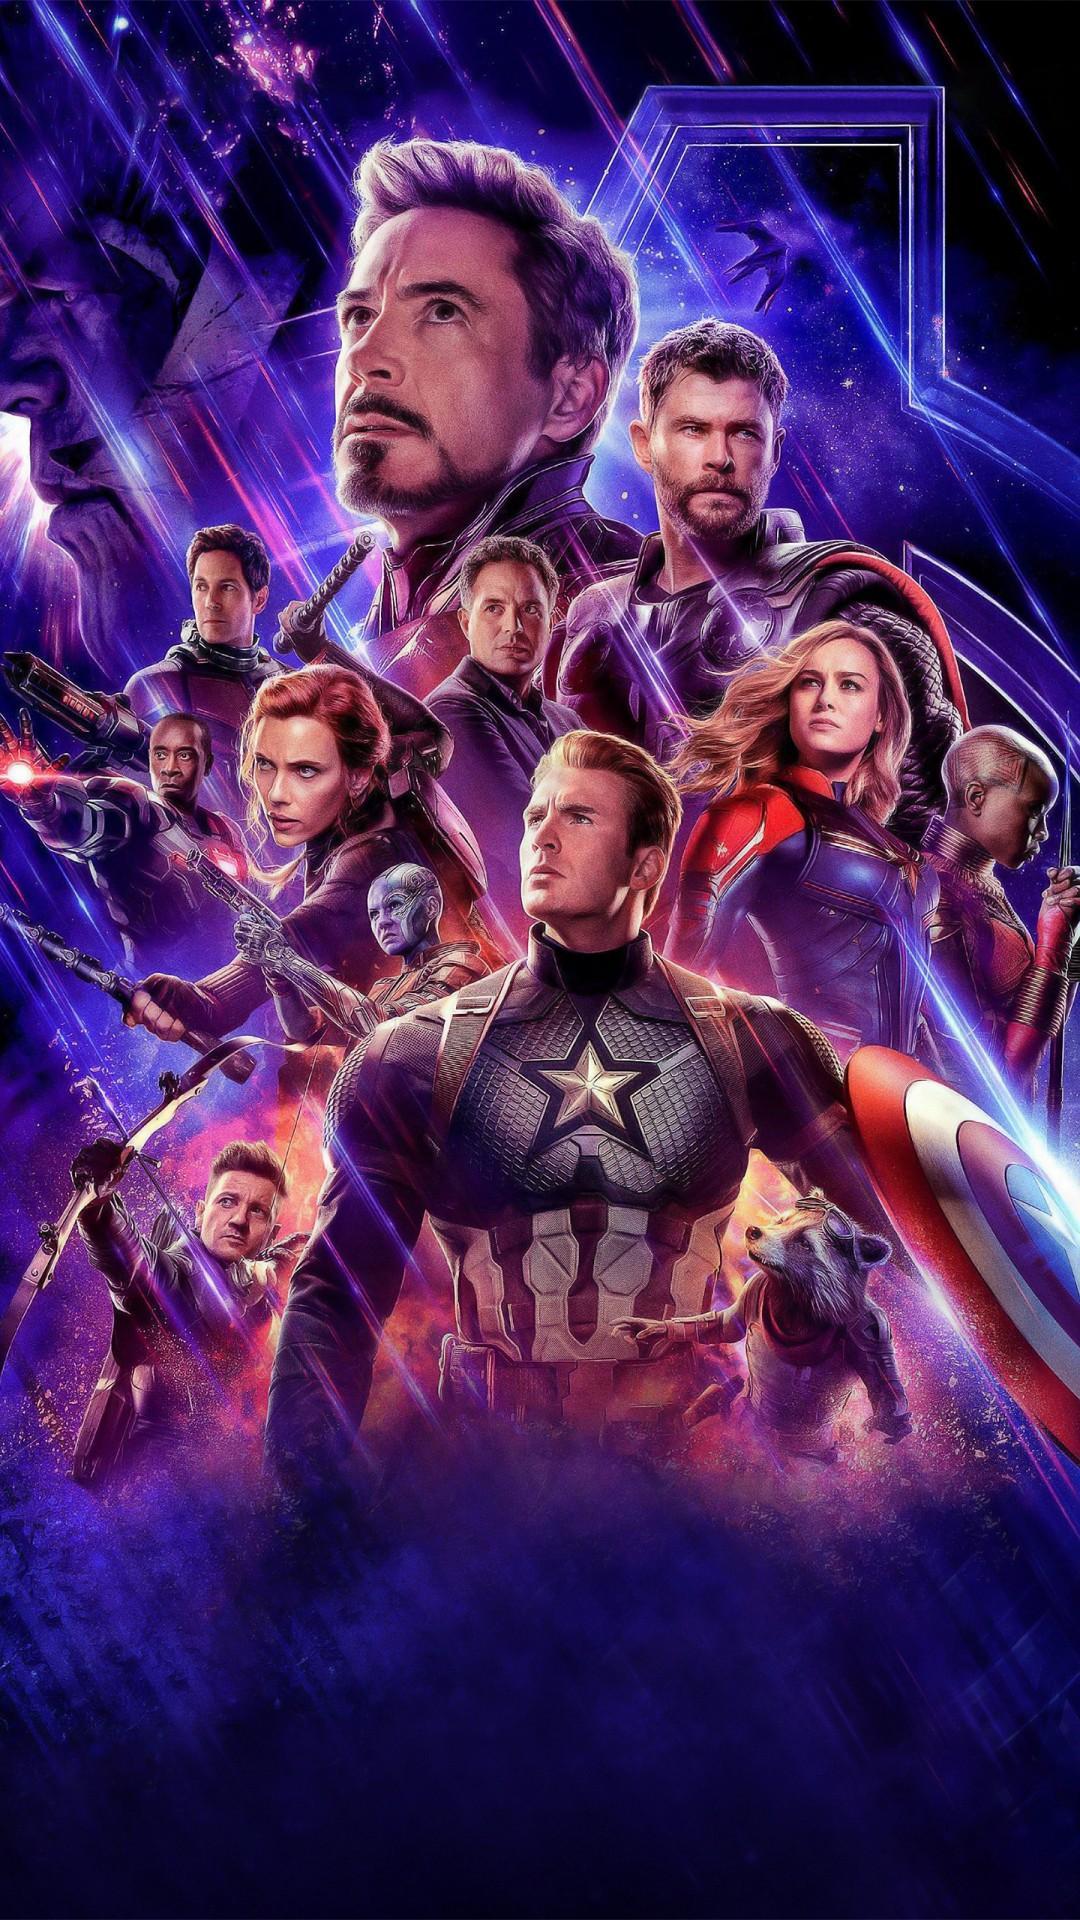 Avengers Endgame Wallpapers Hd 4k For Android Apk Download